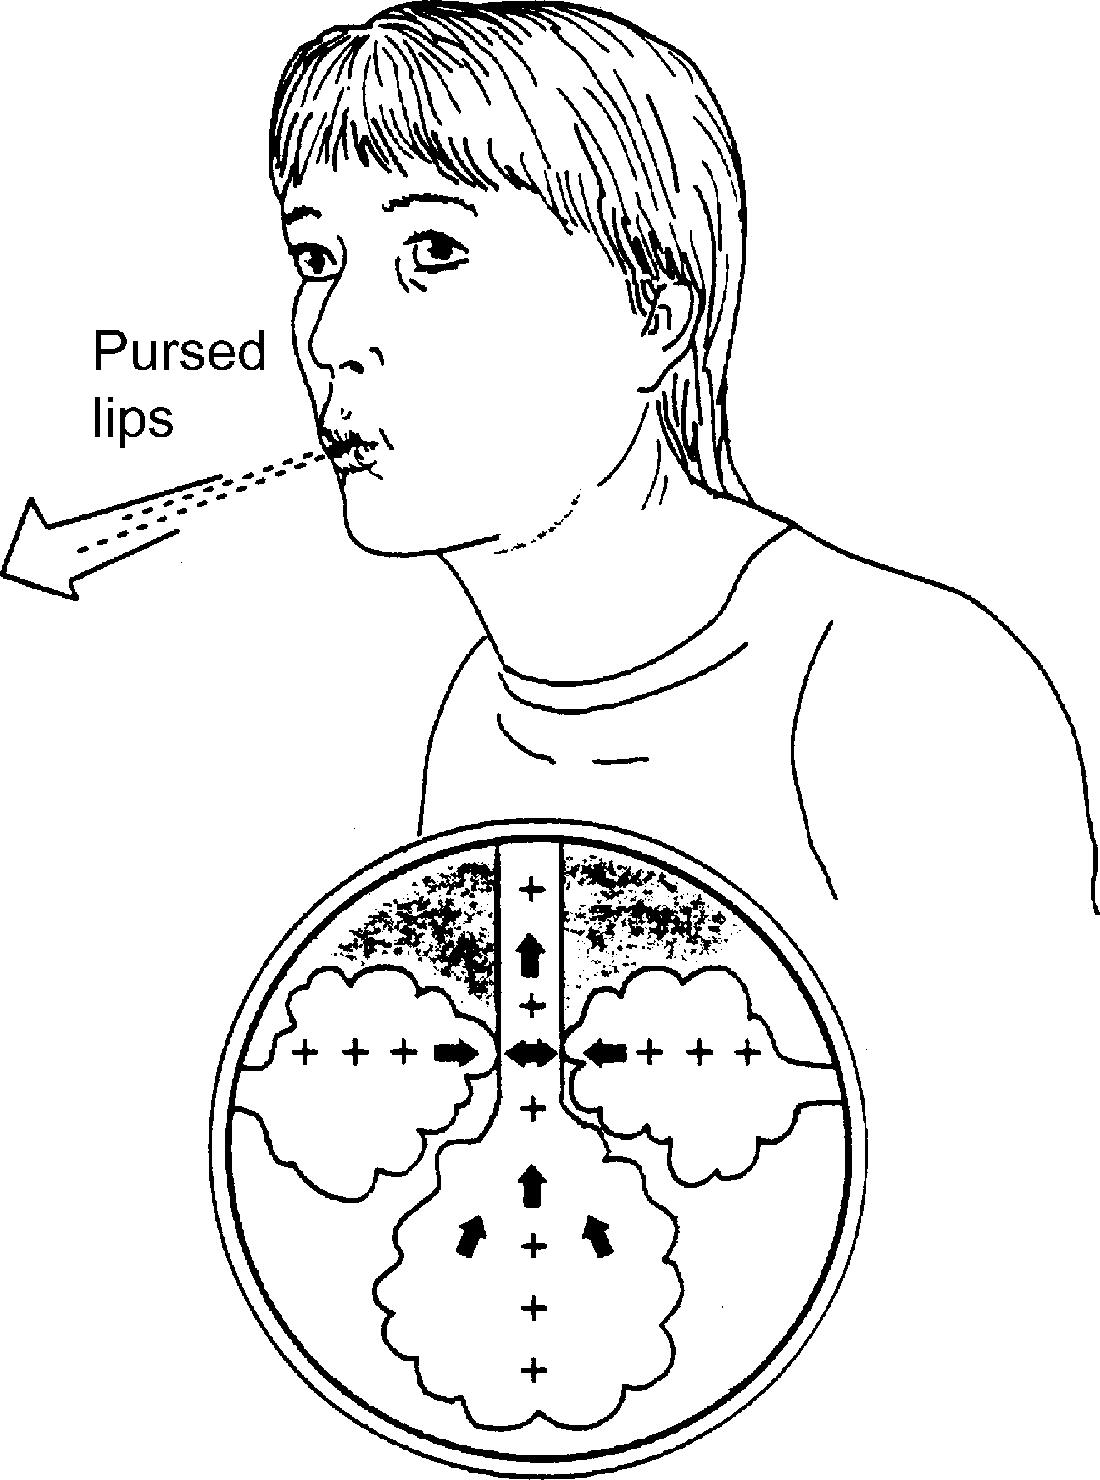 Fig. 11.3, Demonstration of pursed-lip breathing in patients with COPD and its effects. The weakened bronchial airways are kept open by the effects of positive pressure created by pursed lips during expiration.